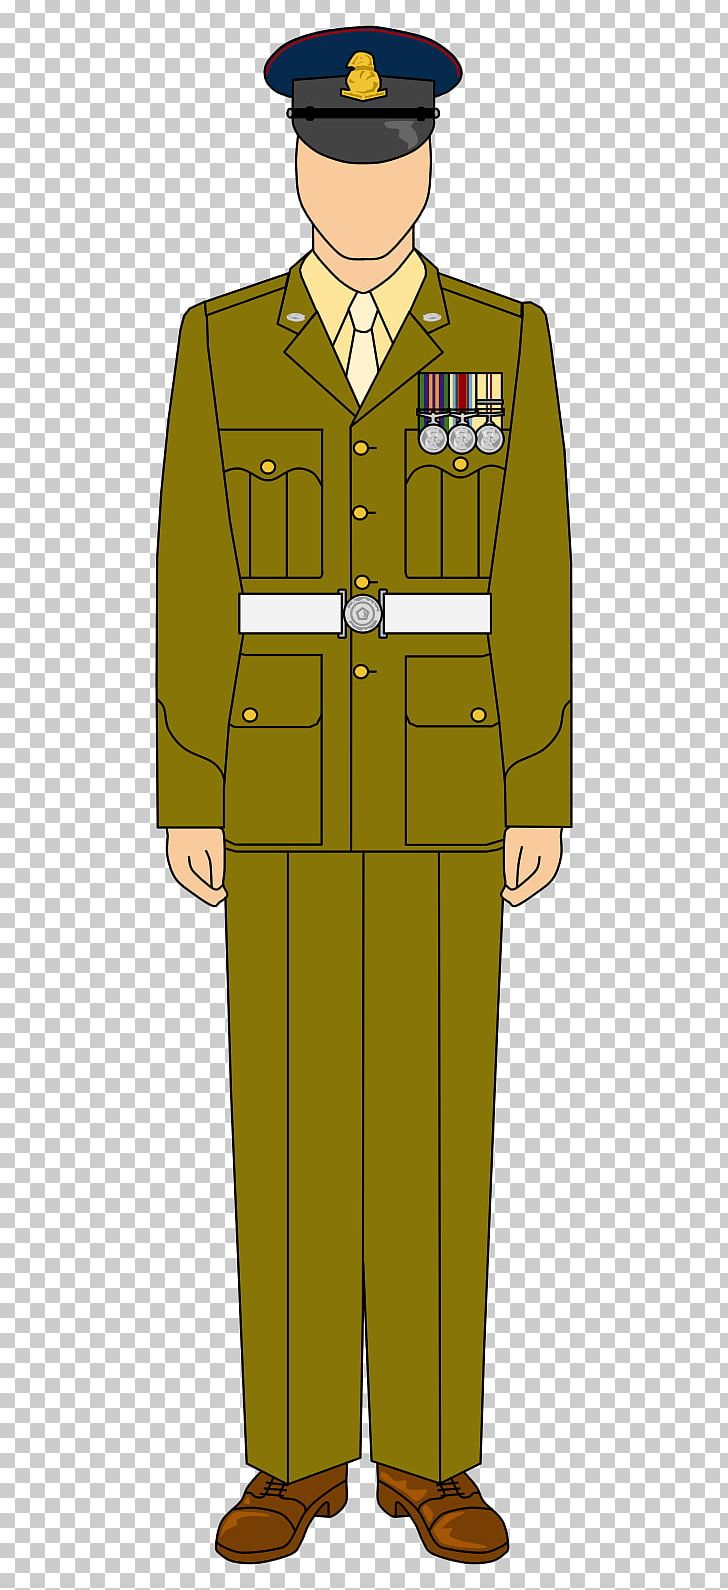 British Army Mess Dress Uniforms Of The British Army British Armed Forces PNG, Clipart, Army, Army Officer, British Army, Fictional Character, Formal Wear Free PNG Download